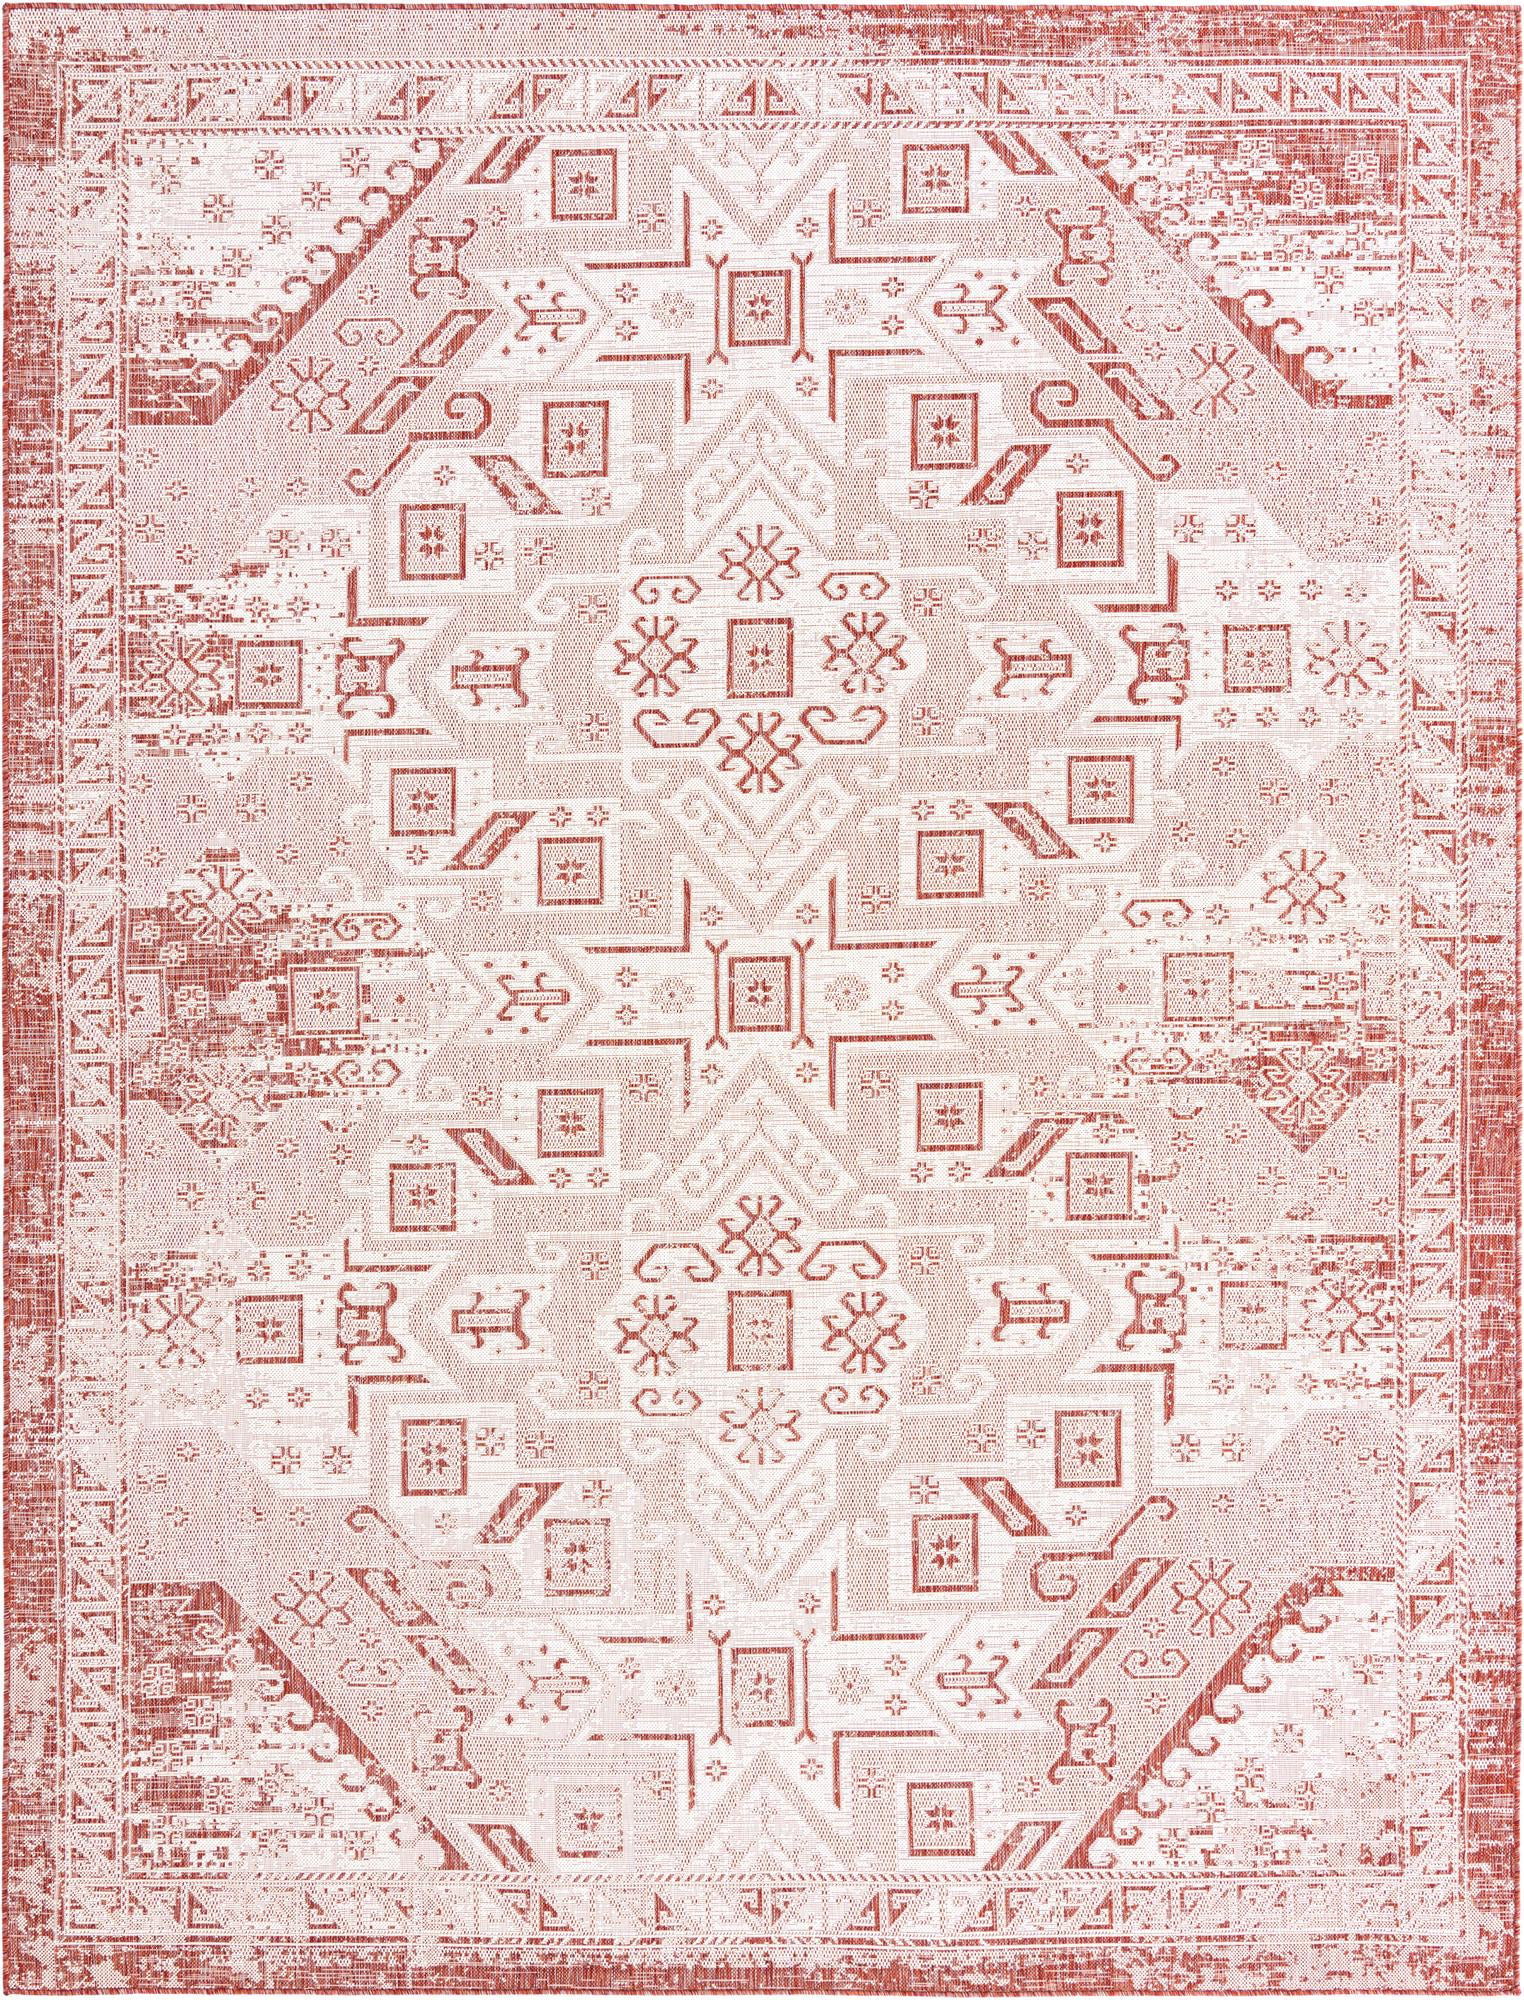 Rugs.com Outdoor Aztec Collection Rug Large Dining Rooms 4' x 6' Rust Red Flatweave Rug Perfect for Living Rooms Open Floorplans 